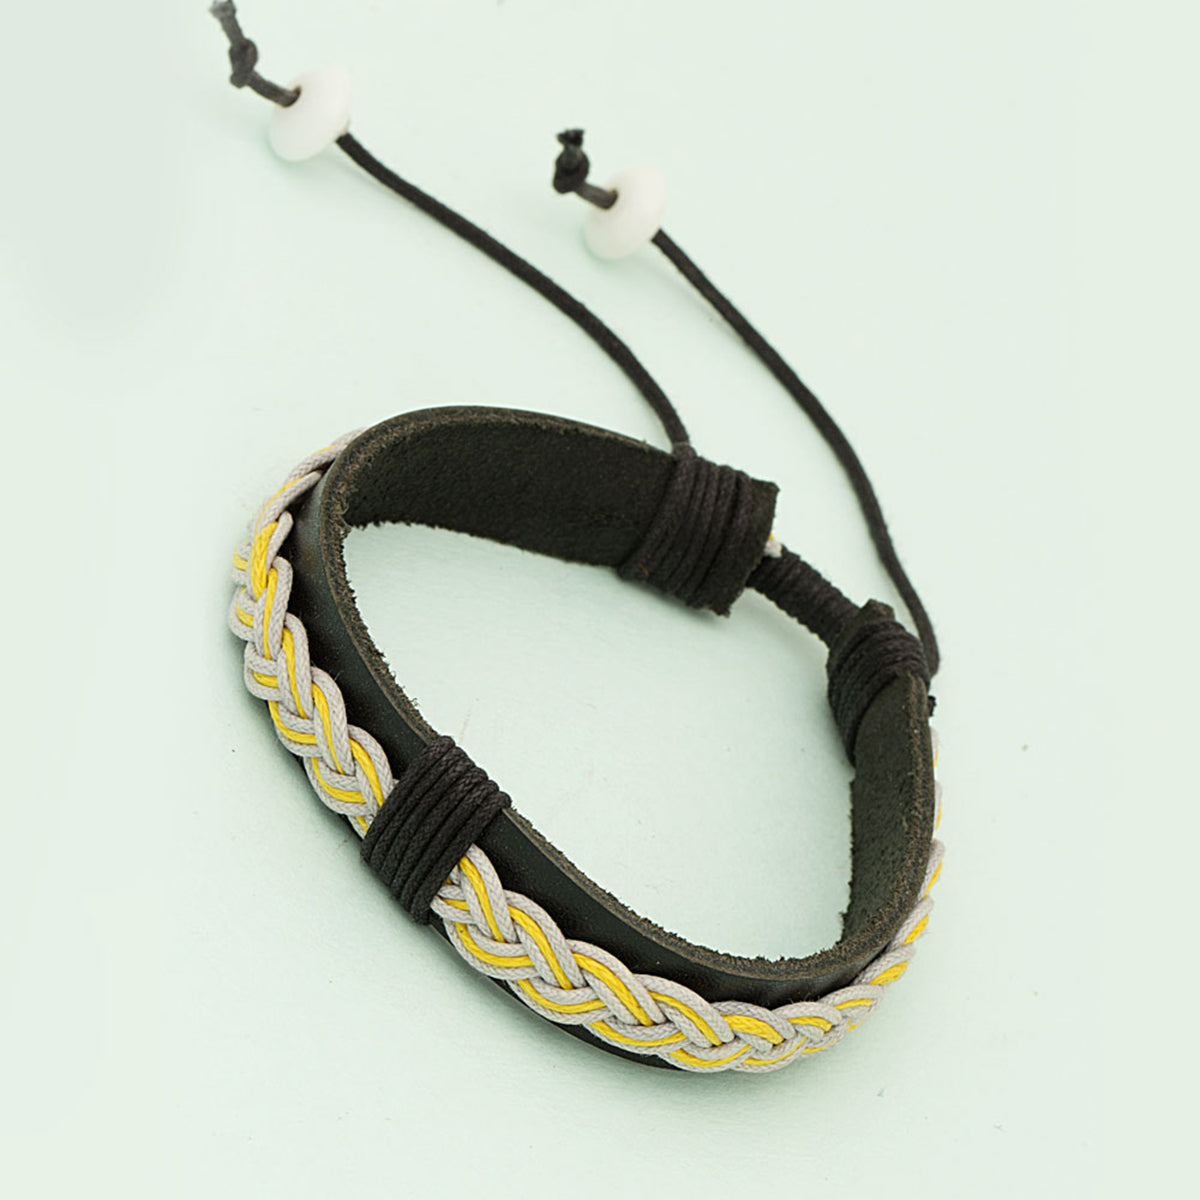 Adjustable Bracelet - Brown And Yellow Thread